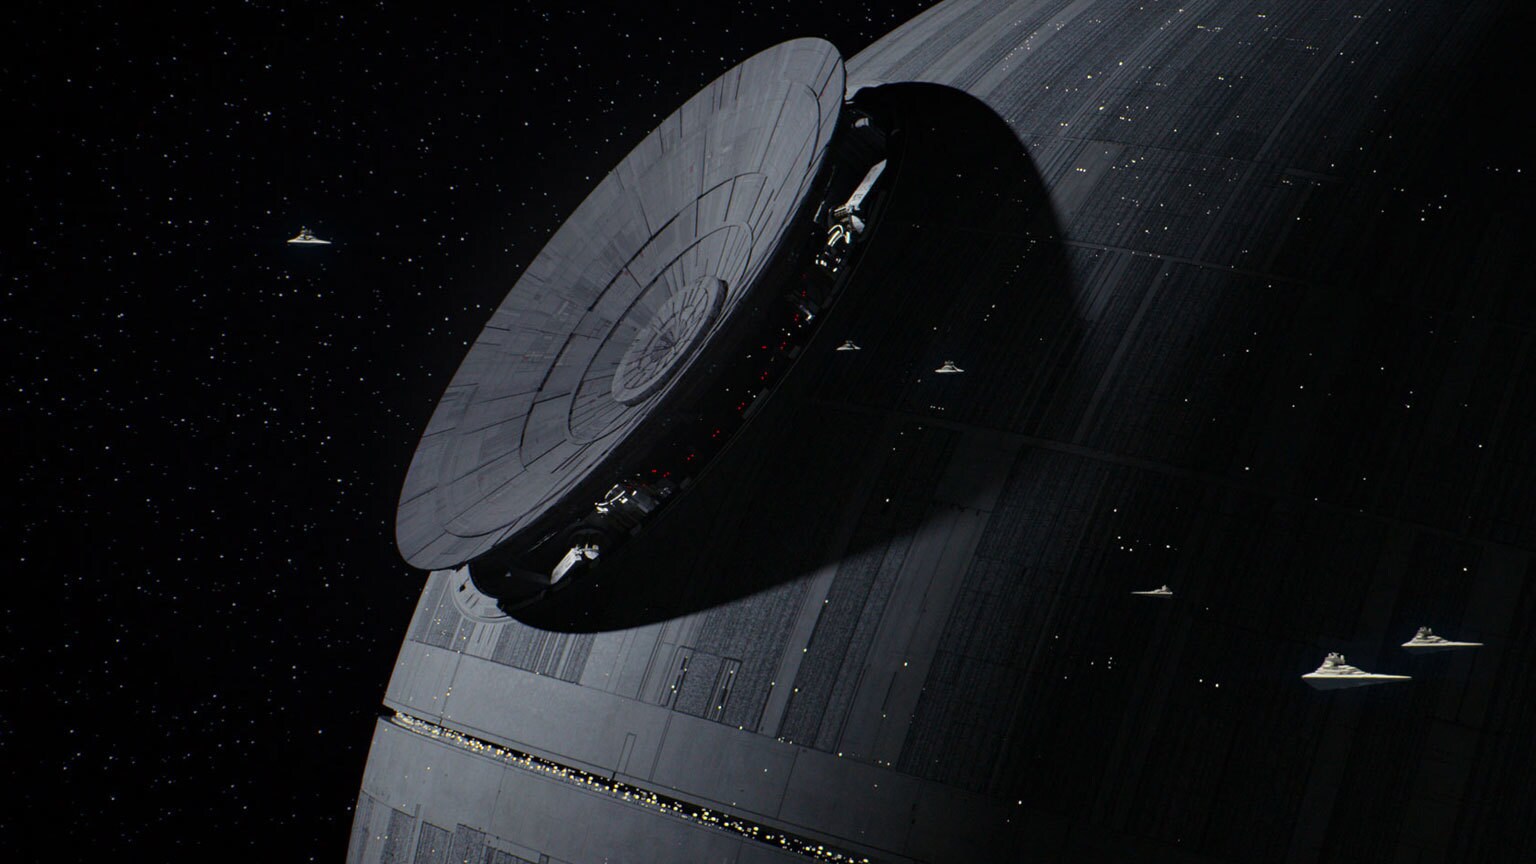 The Death Star as depicted in Rogue One, with several Star Destroyers appearing small in comparison as they pass in front of the station.